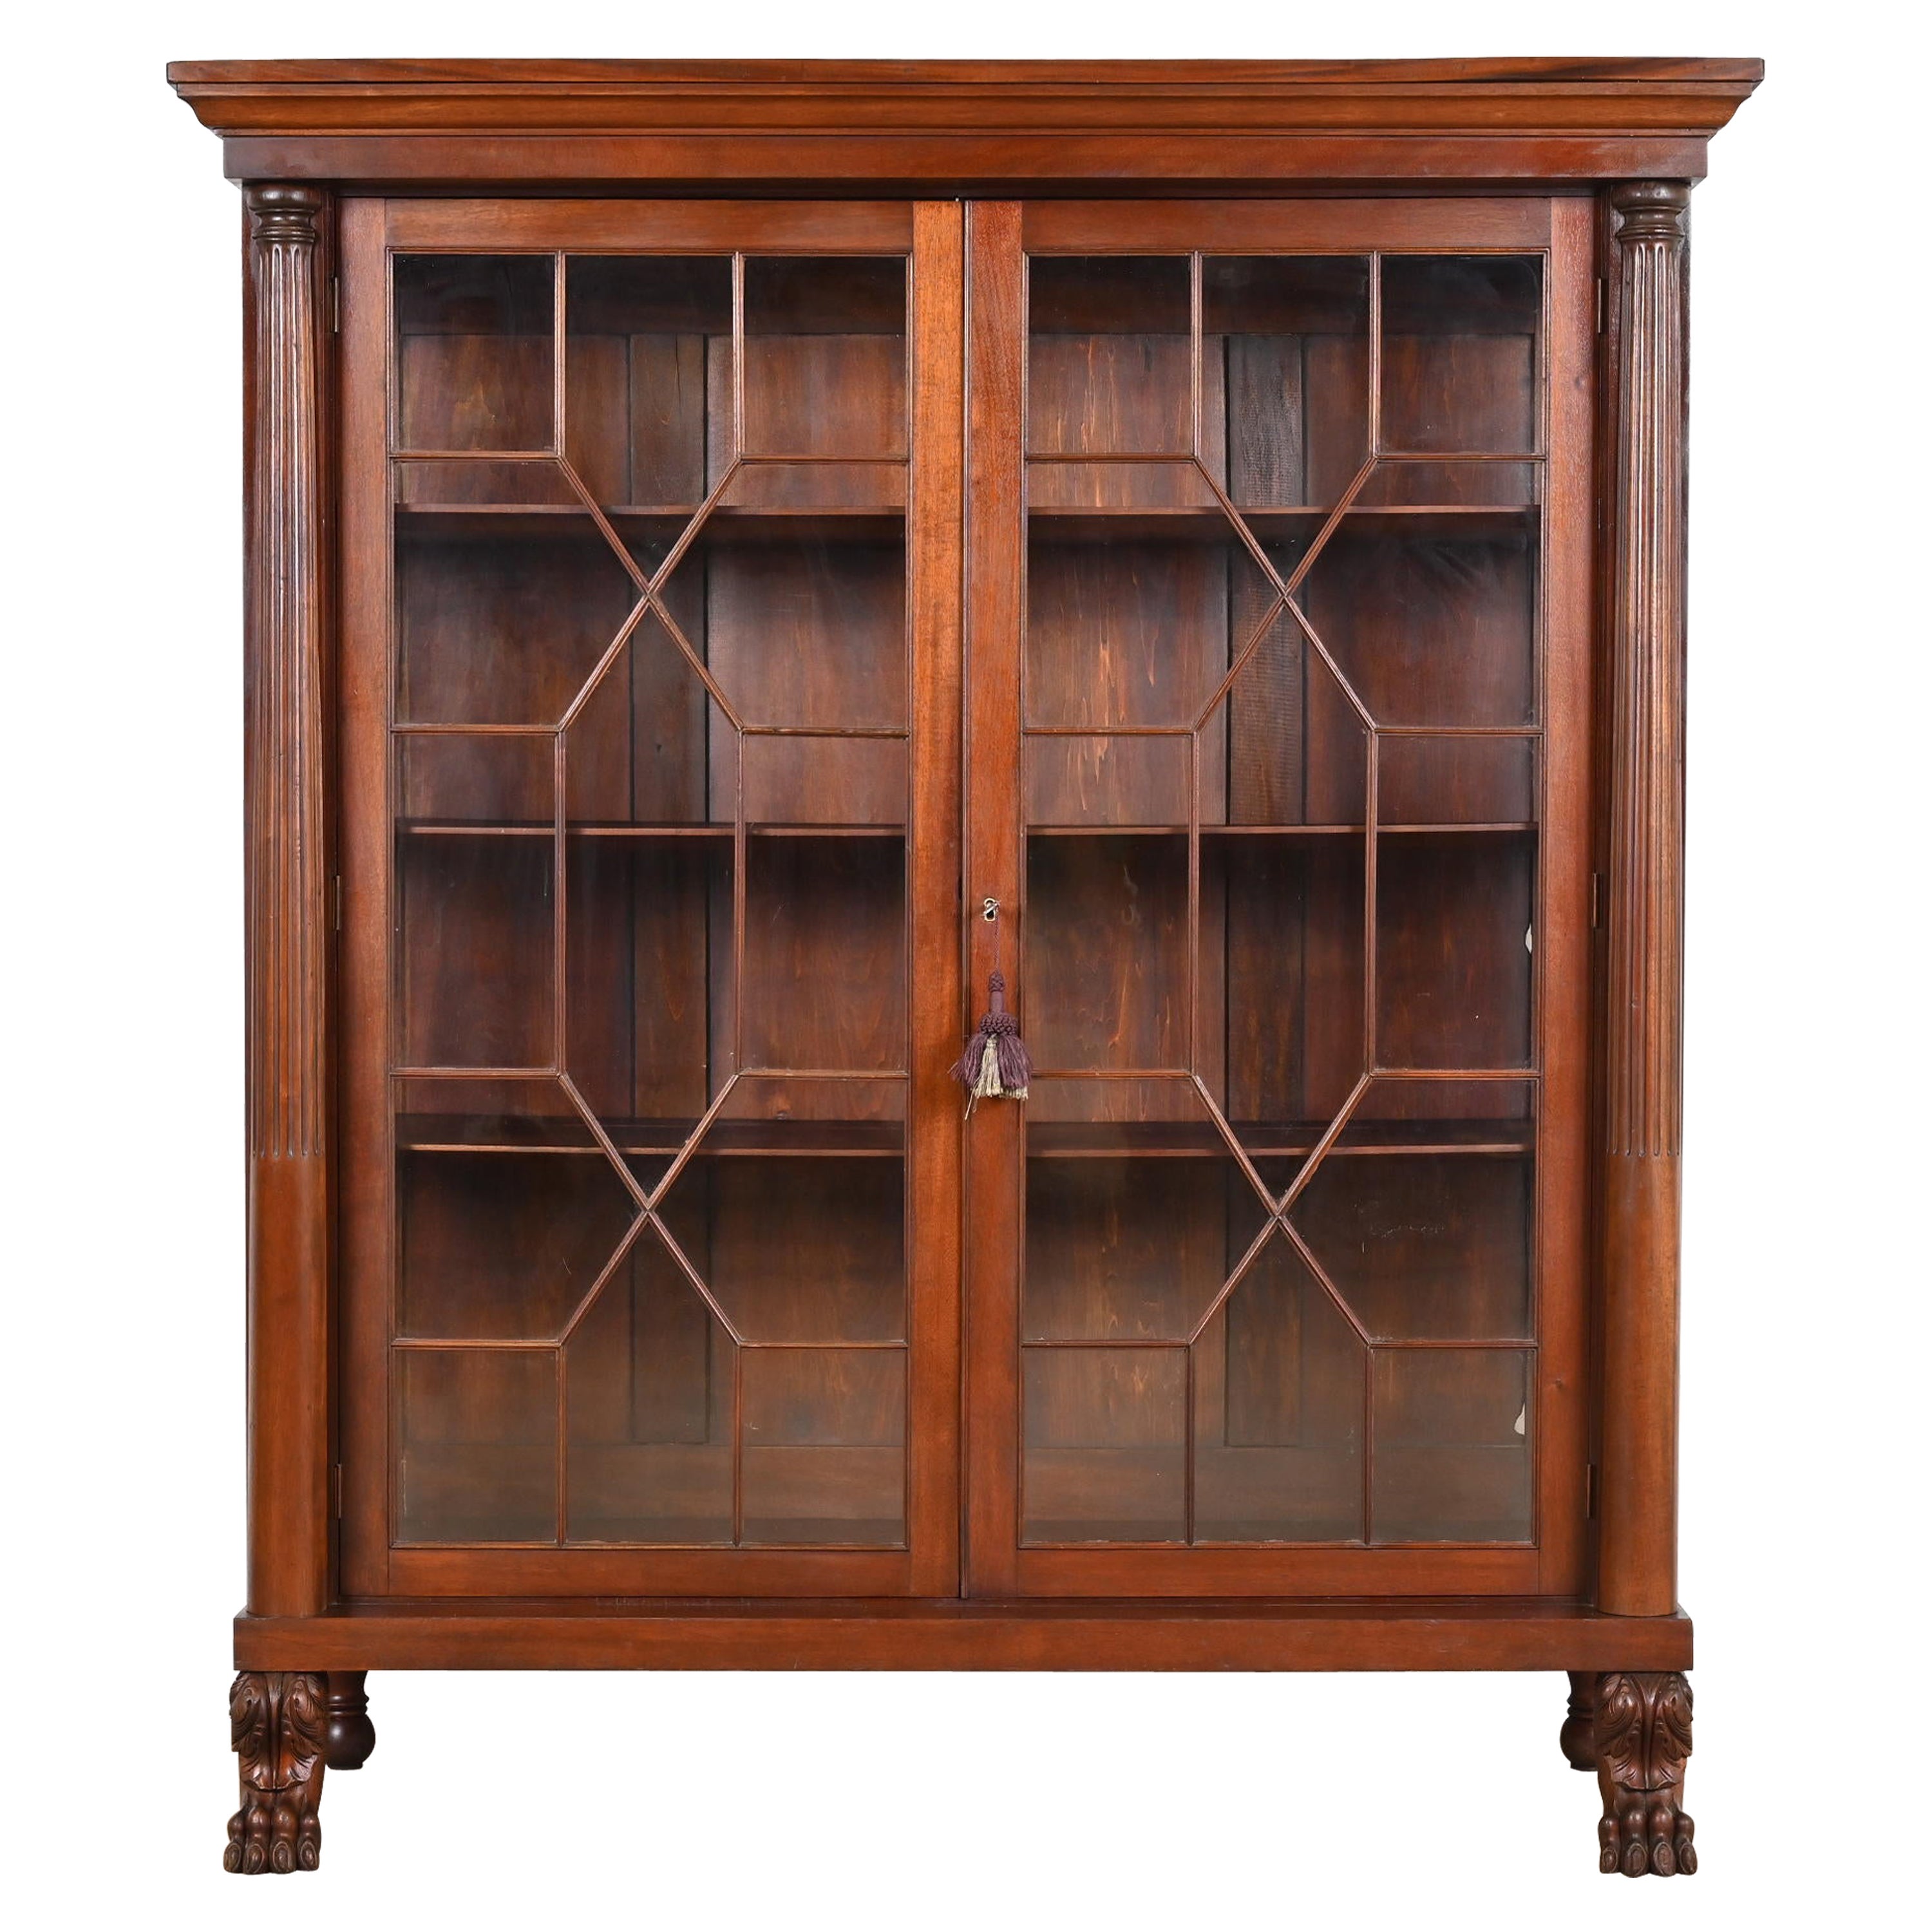 Antique American Empire Carved Mahogany Bookcase in the Manner of R.J. Horner For Sale